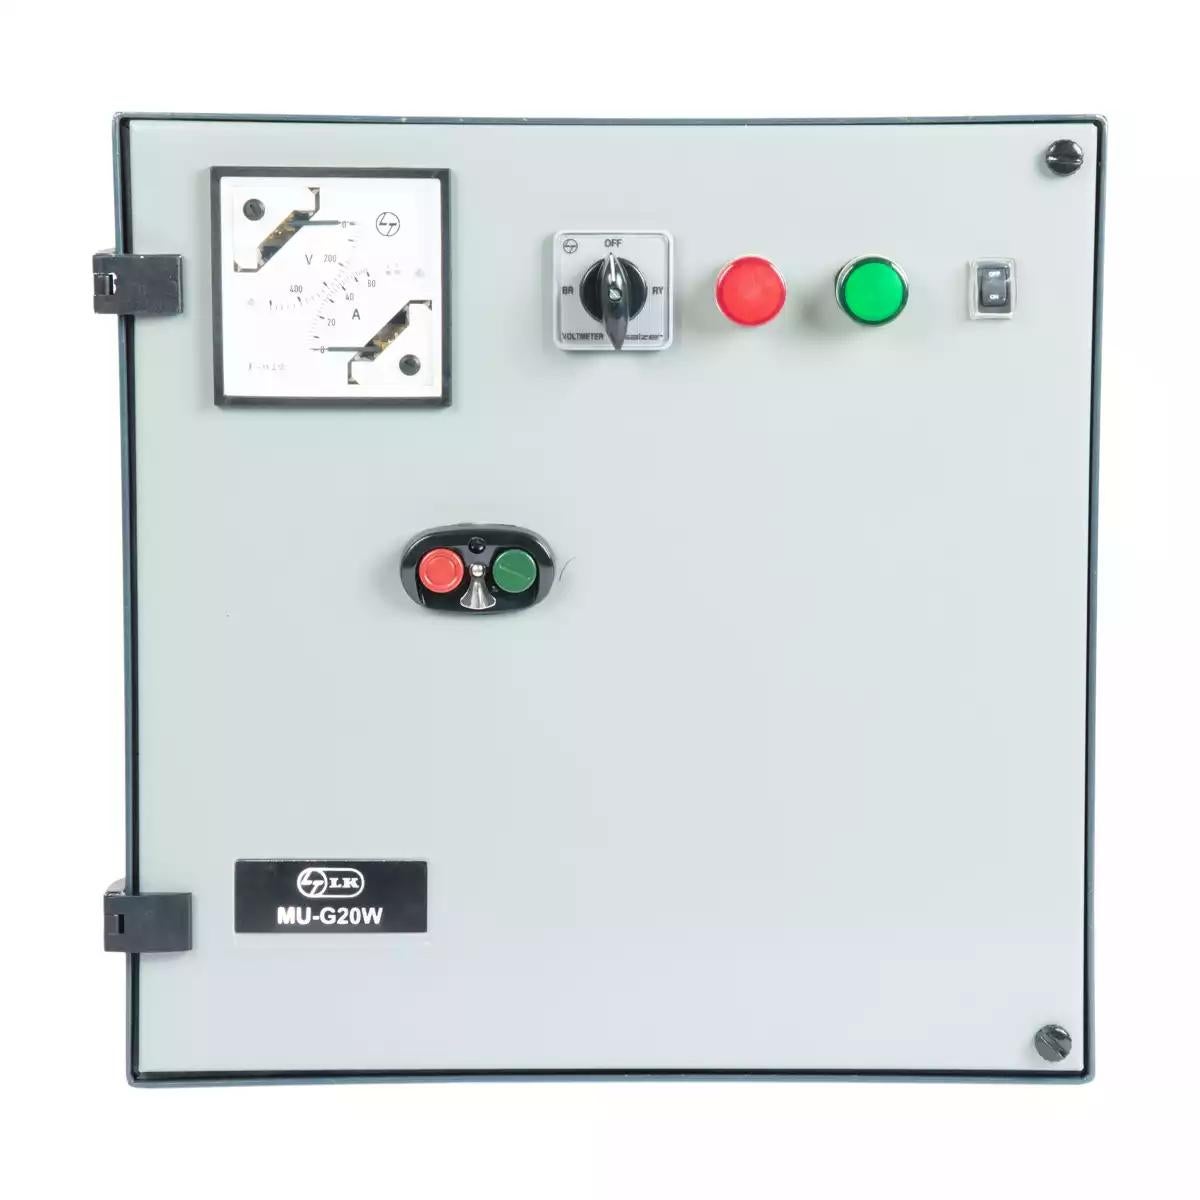 Three Phase Fully Automatic Star Delta Controller with WLC for Submersible Pump Application,MU-G20W,20HP,FASD (CS91038DOEO)